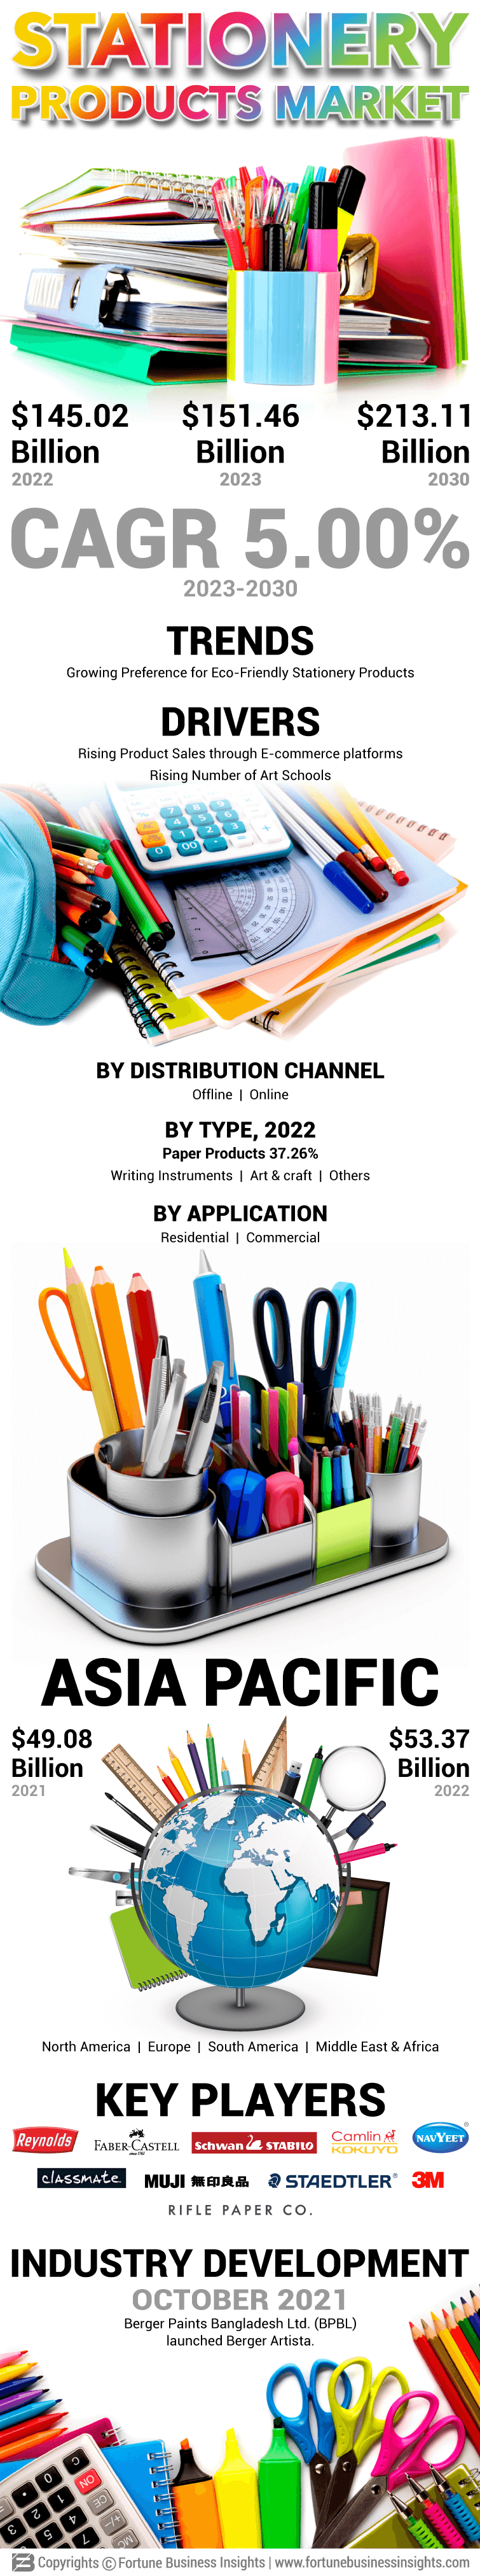 Stationery Products Market